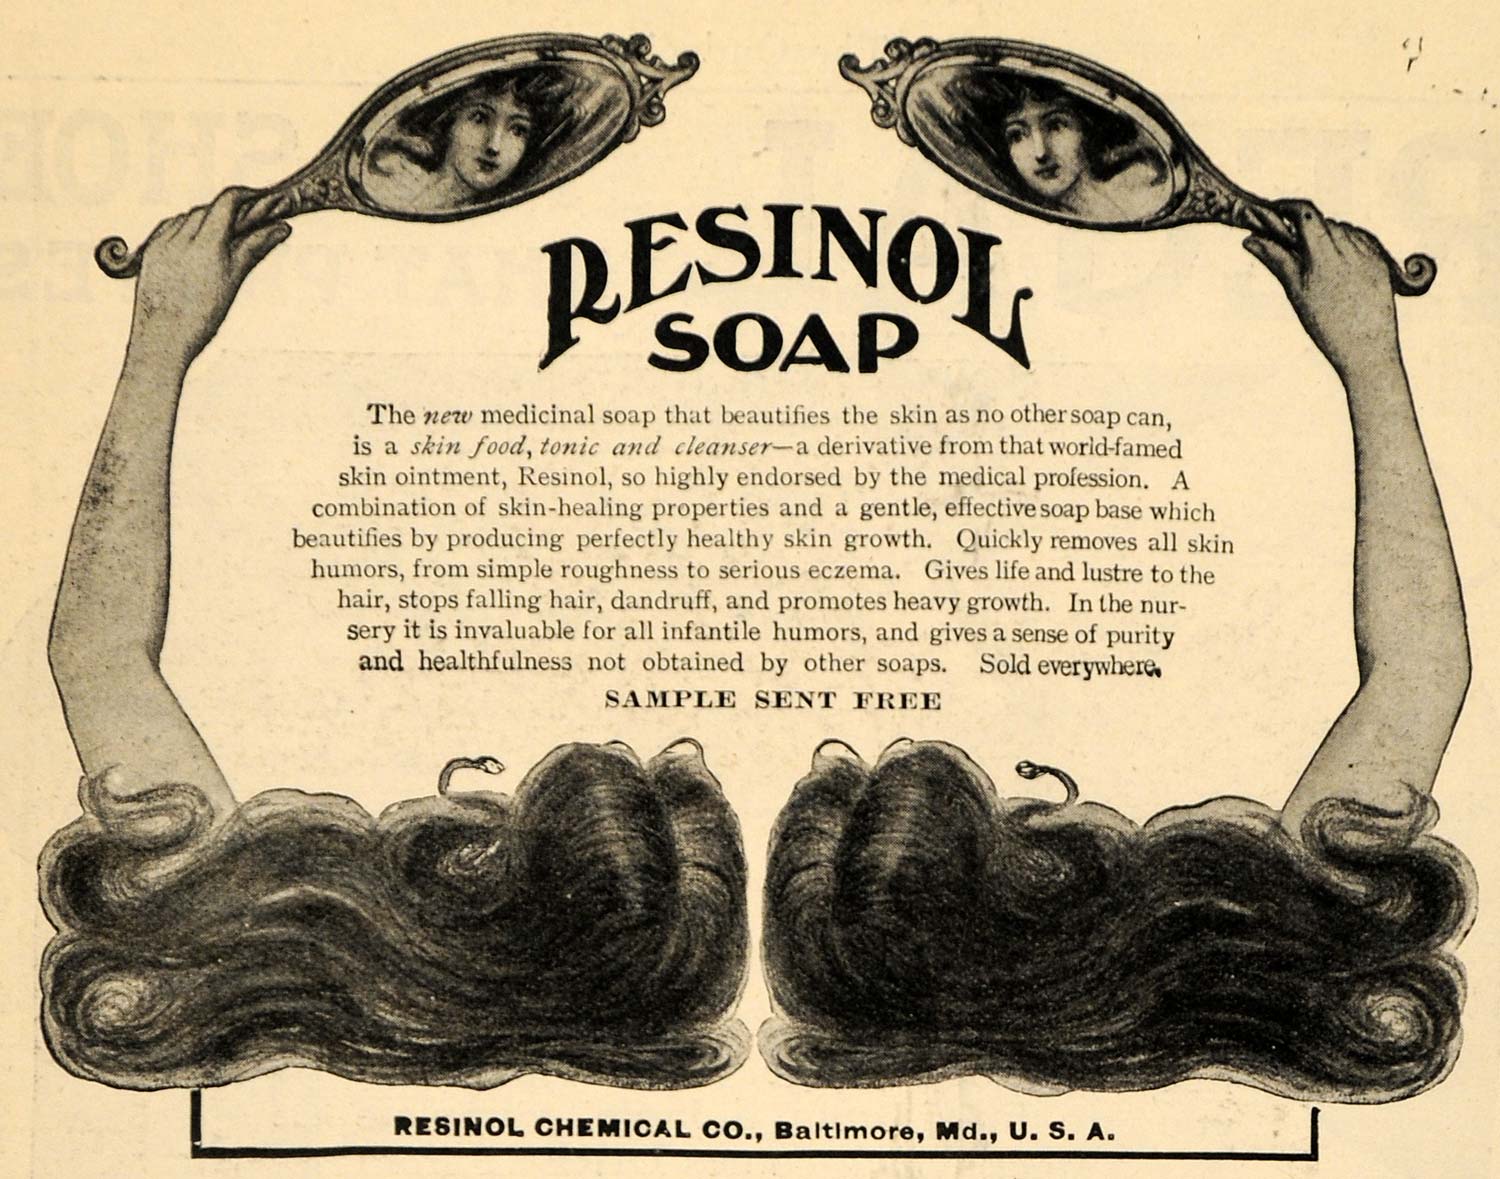 1903 Ad Resinol Chemical Co Toilet Soap Beauty Products - ORIGINAL TOM1